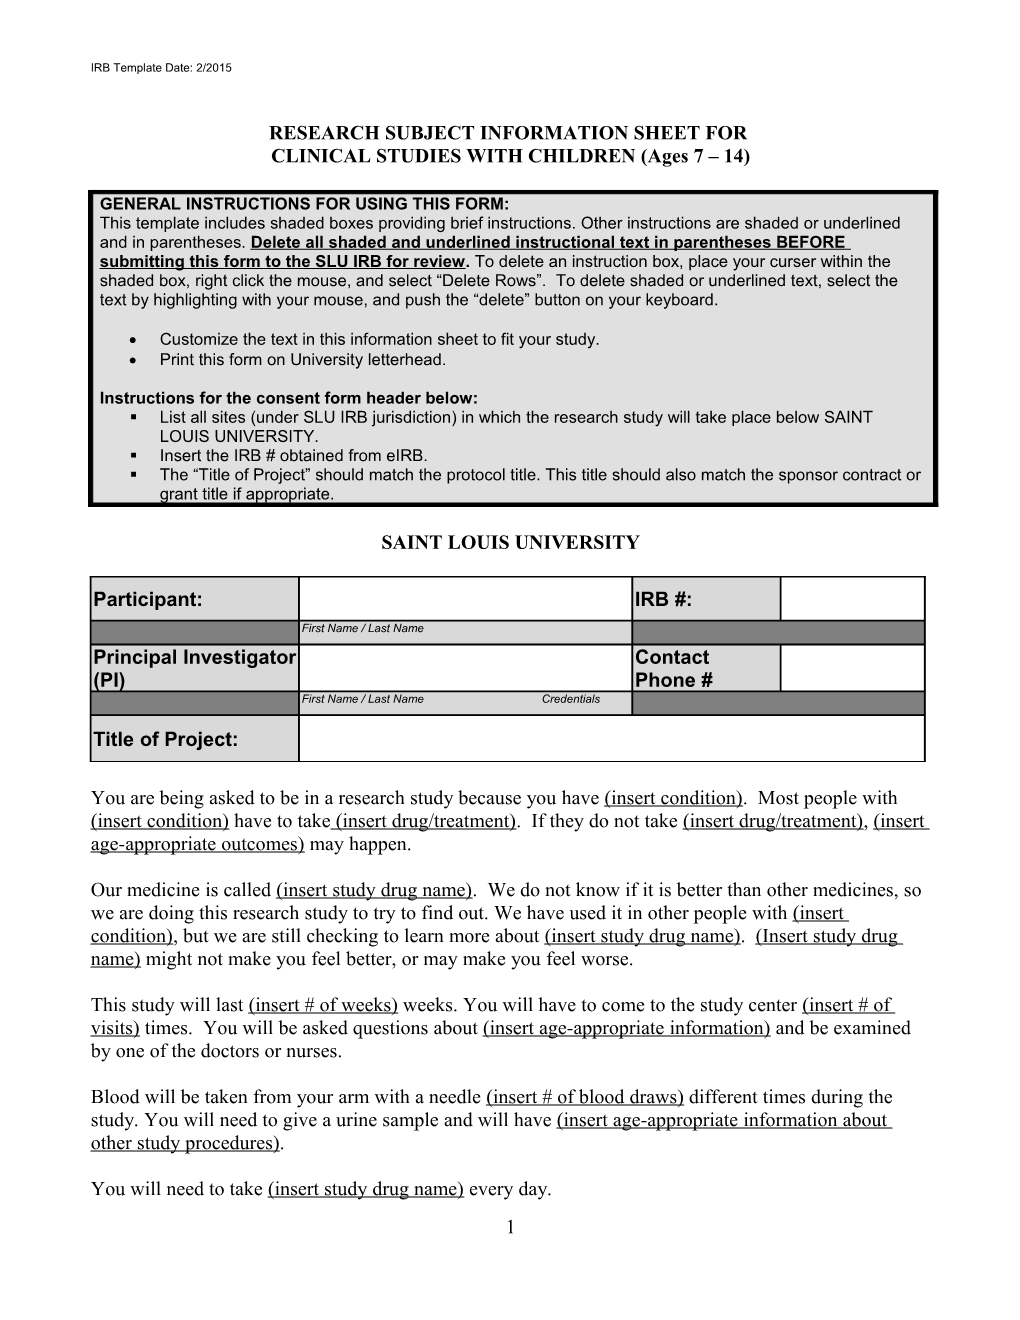 Research Subject Information Sheet for Adolescents